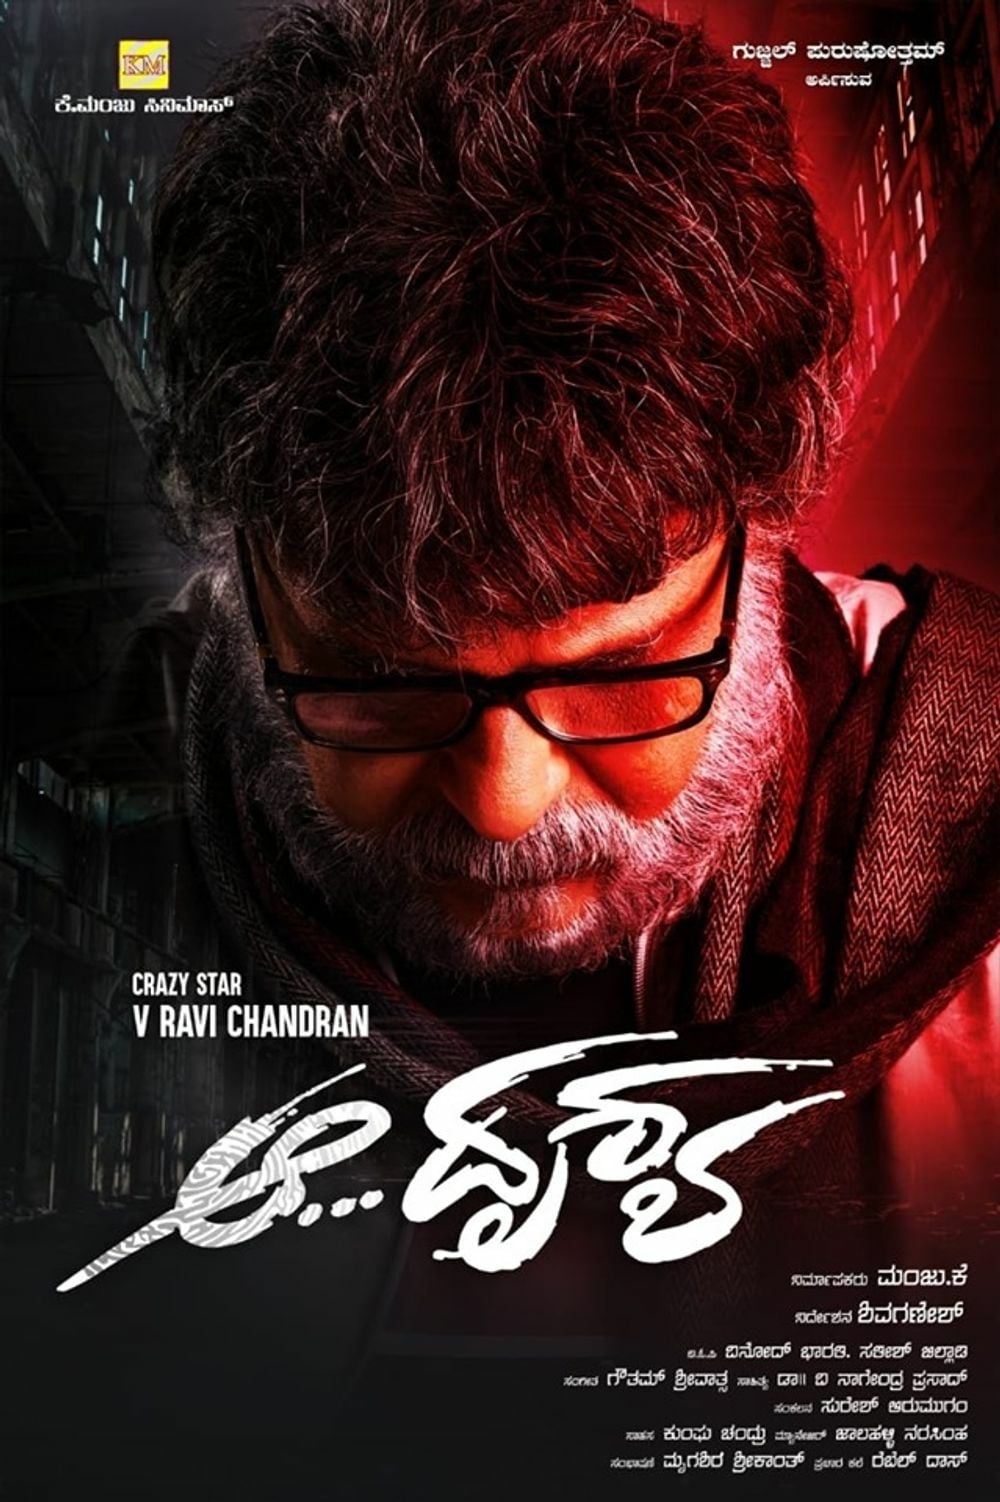 Poster for the movie "Aa Drushya"